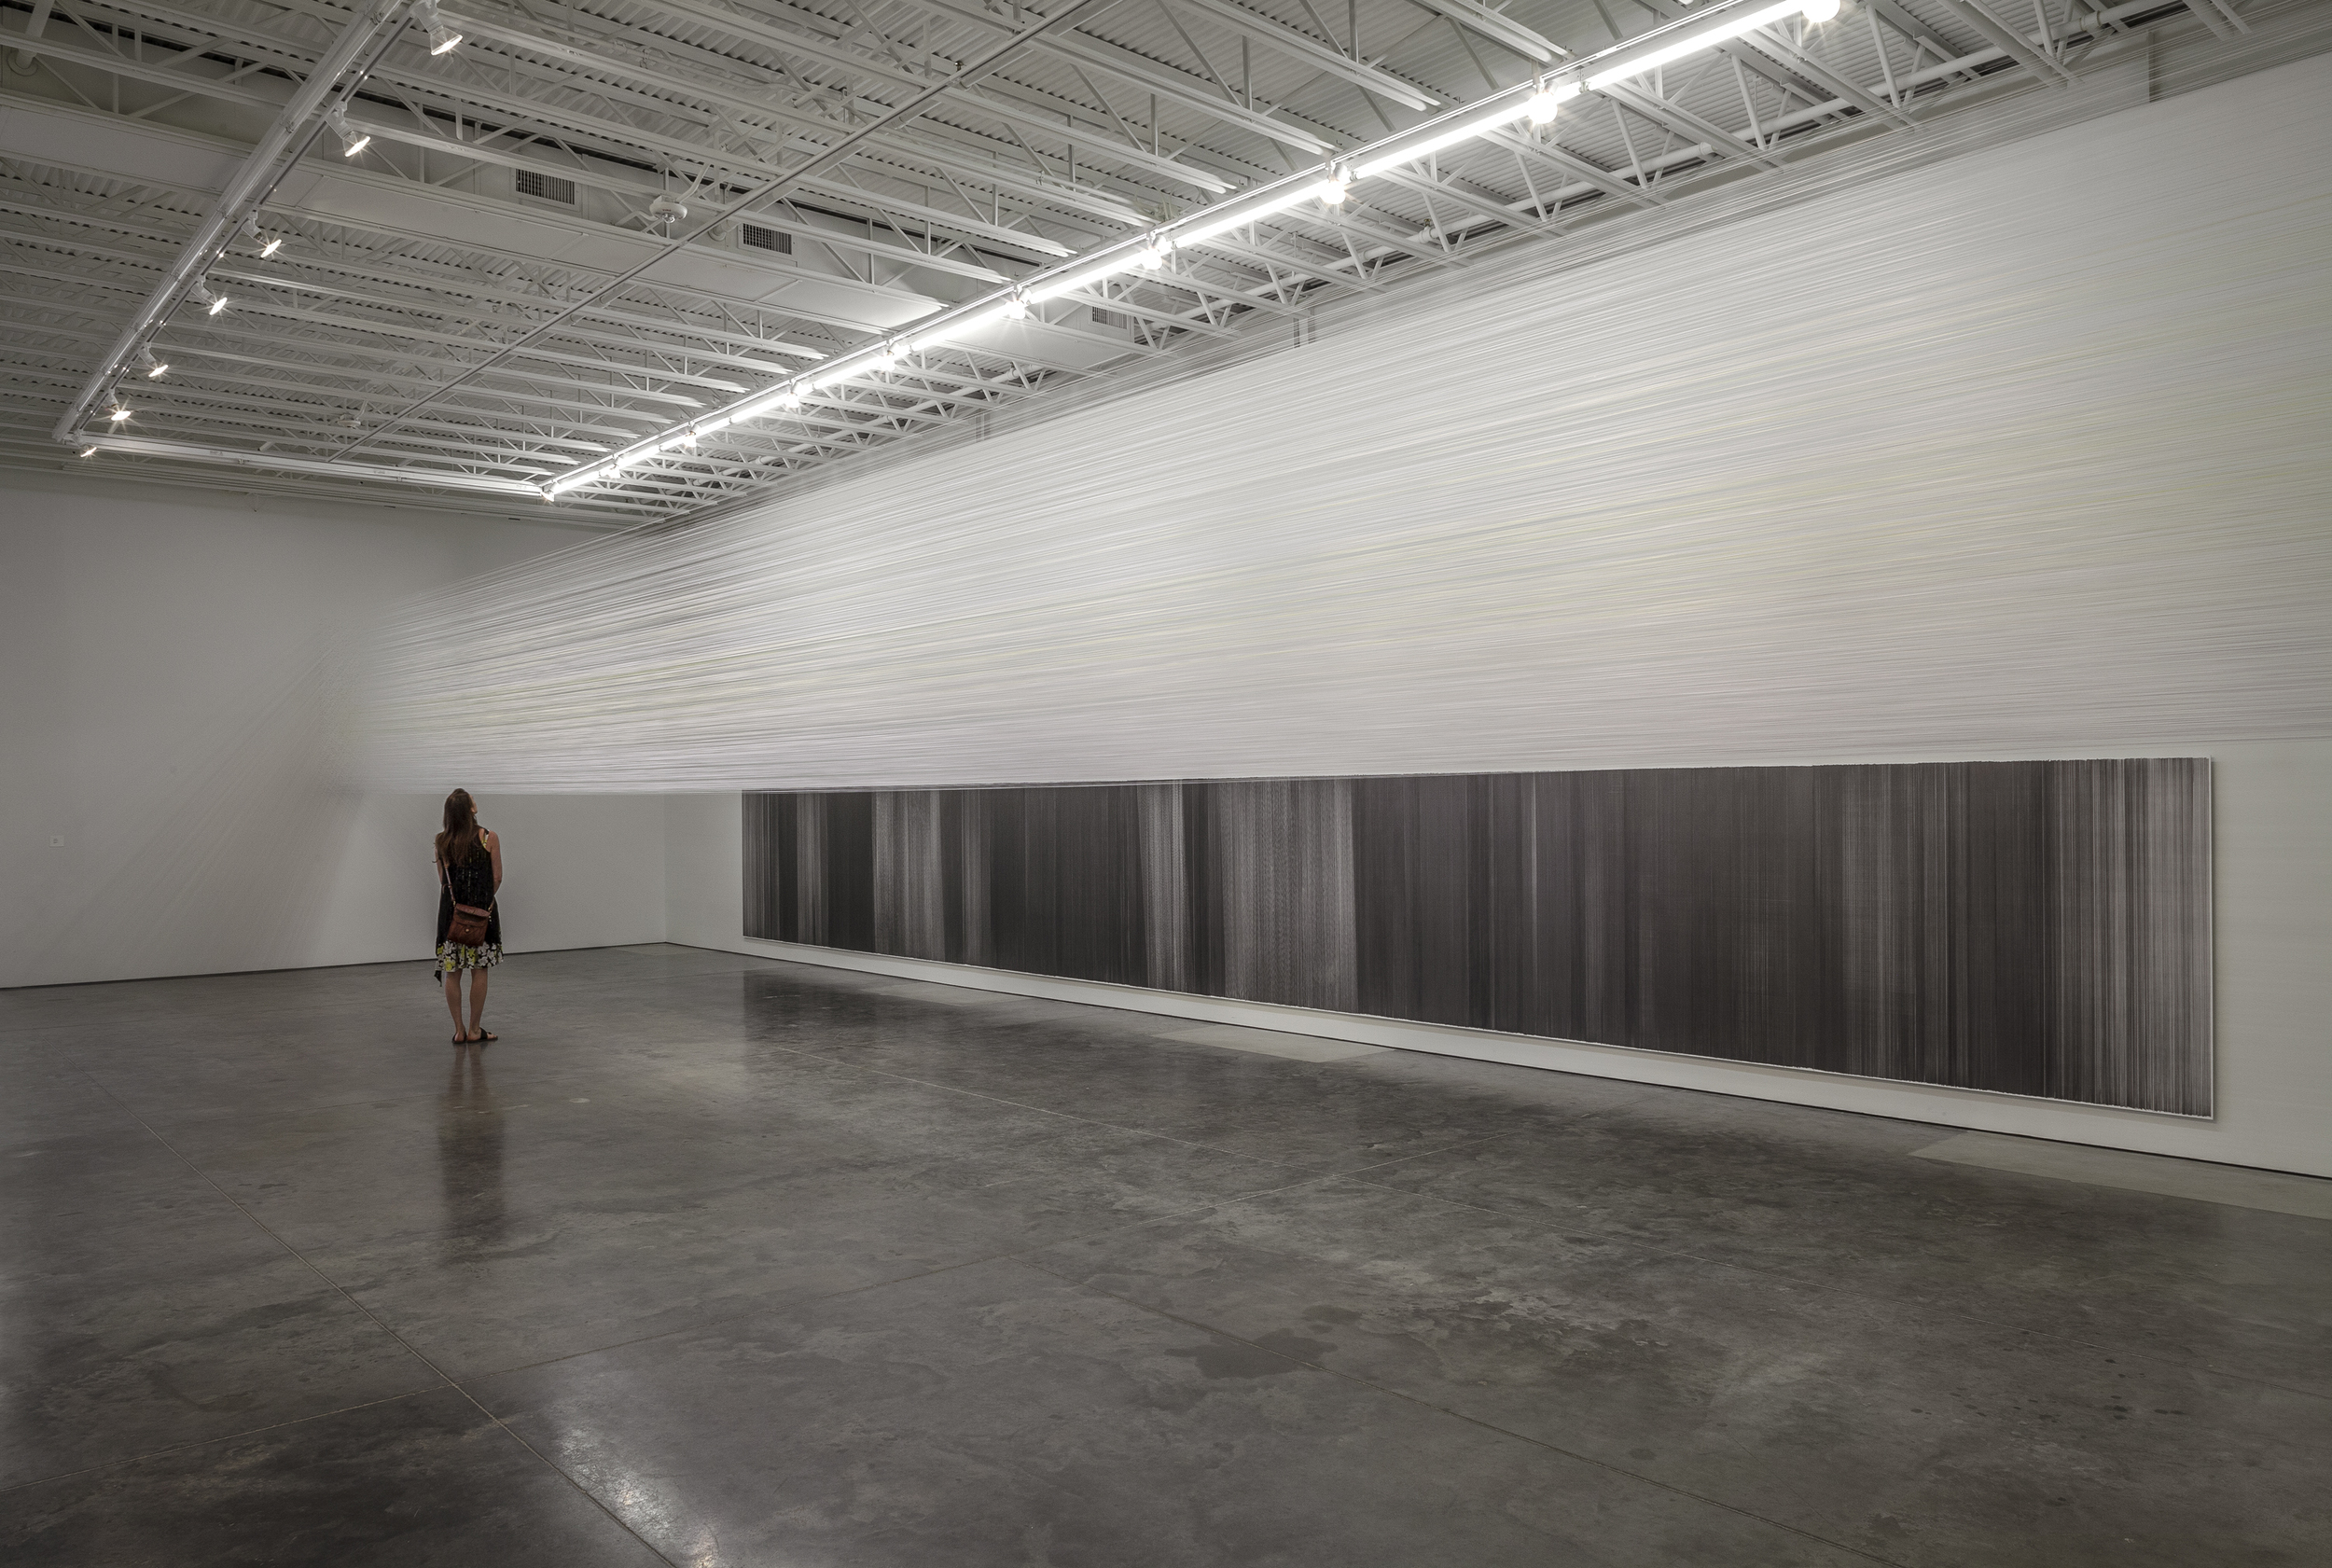    drawn above   2014 cotton thread, staples 66 inches x 55 feet x 18 inches    drawn below   2014 graphite on cotton mat board 59 inches x 42.5 feet  photography by Derek Porter 